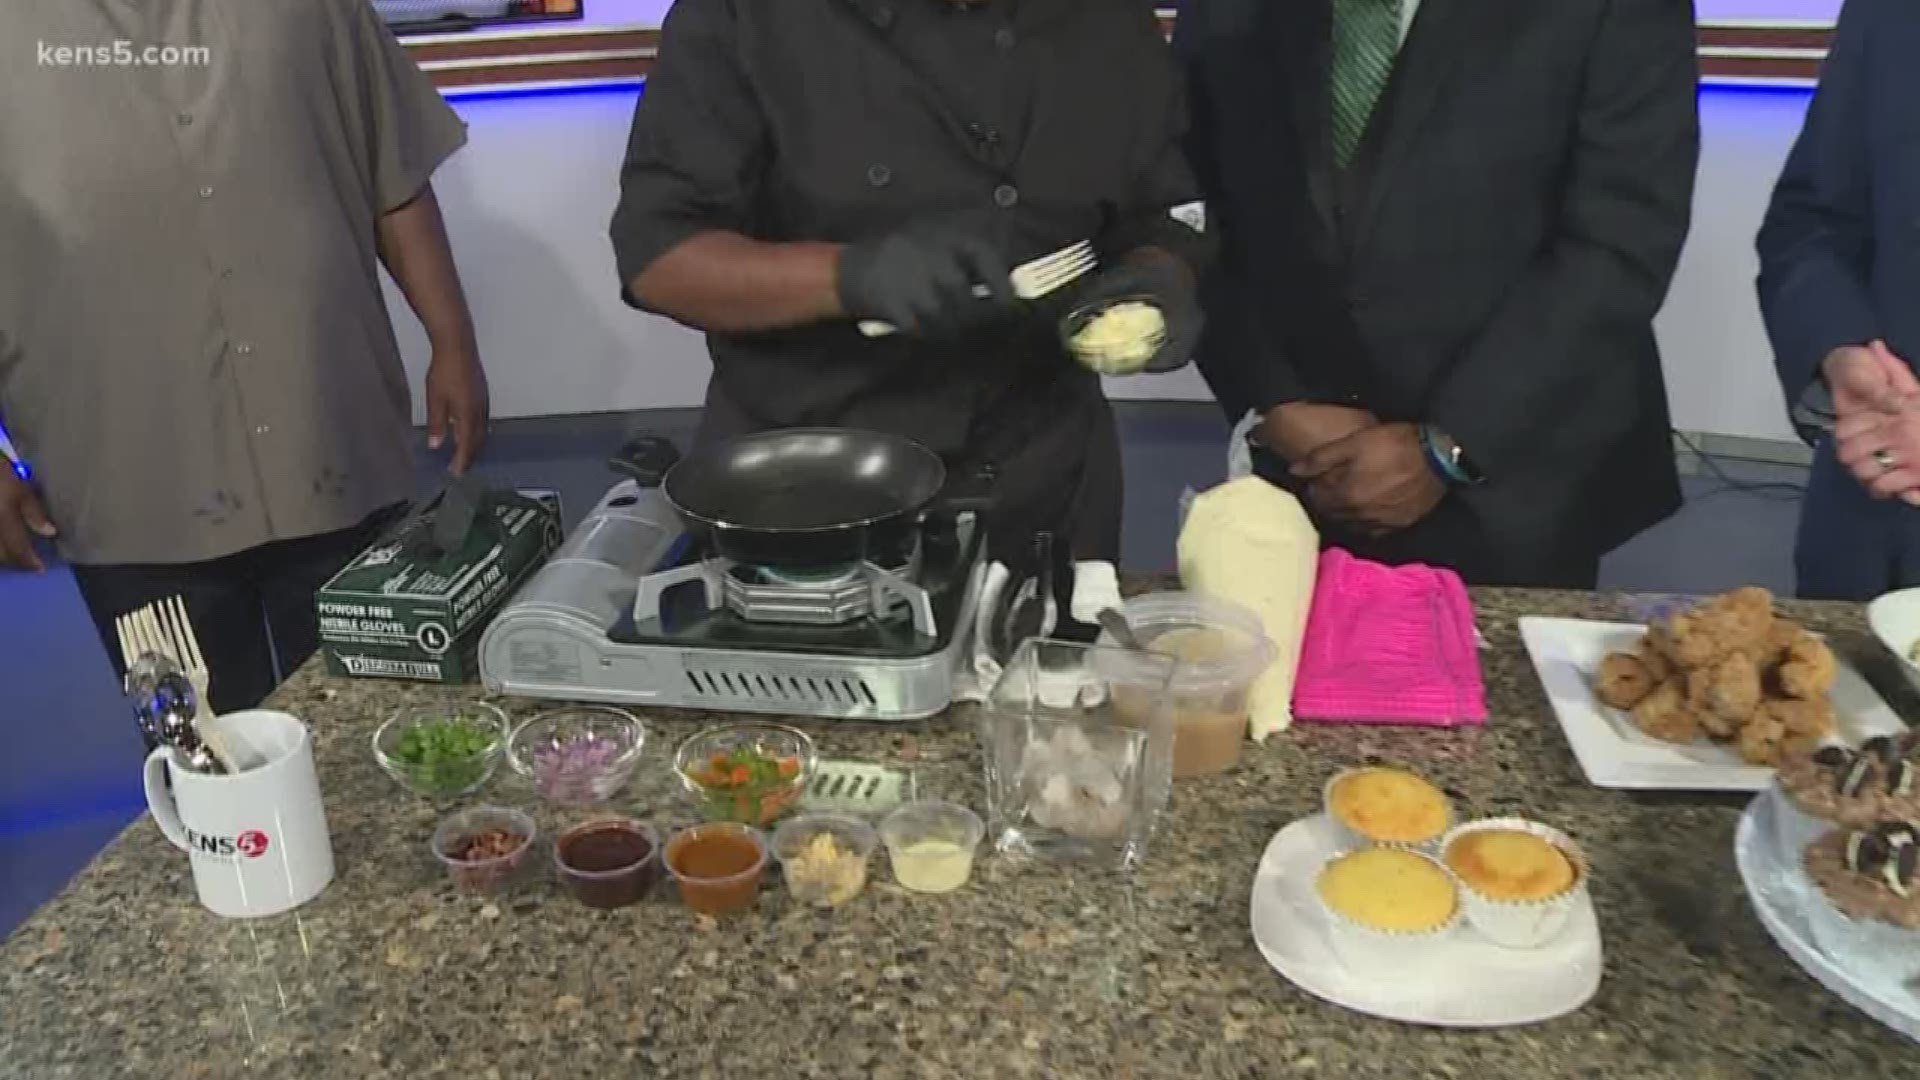 Keith Toney, Warren Smith, and Chef Drea stop by KENS 5 to tell us all about the upcoming Soul Food Celebration taking place next weekend.